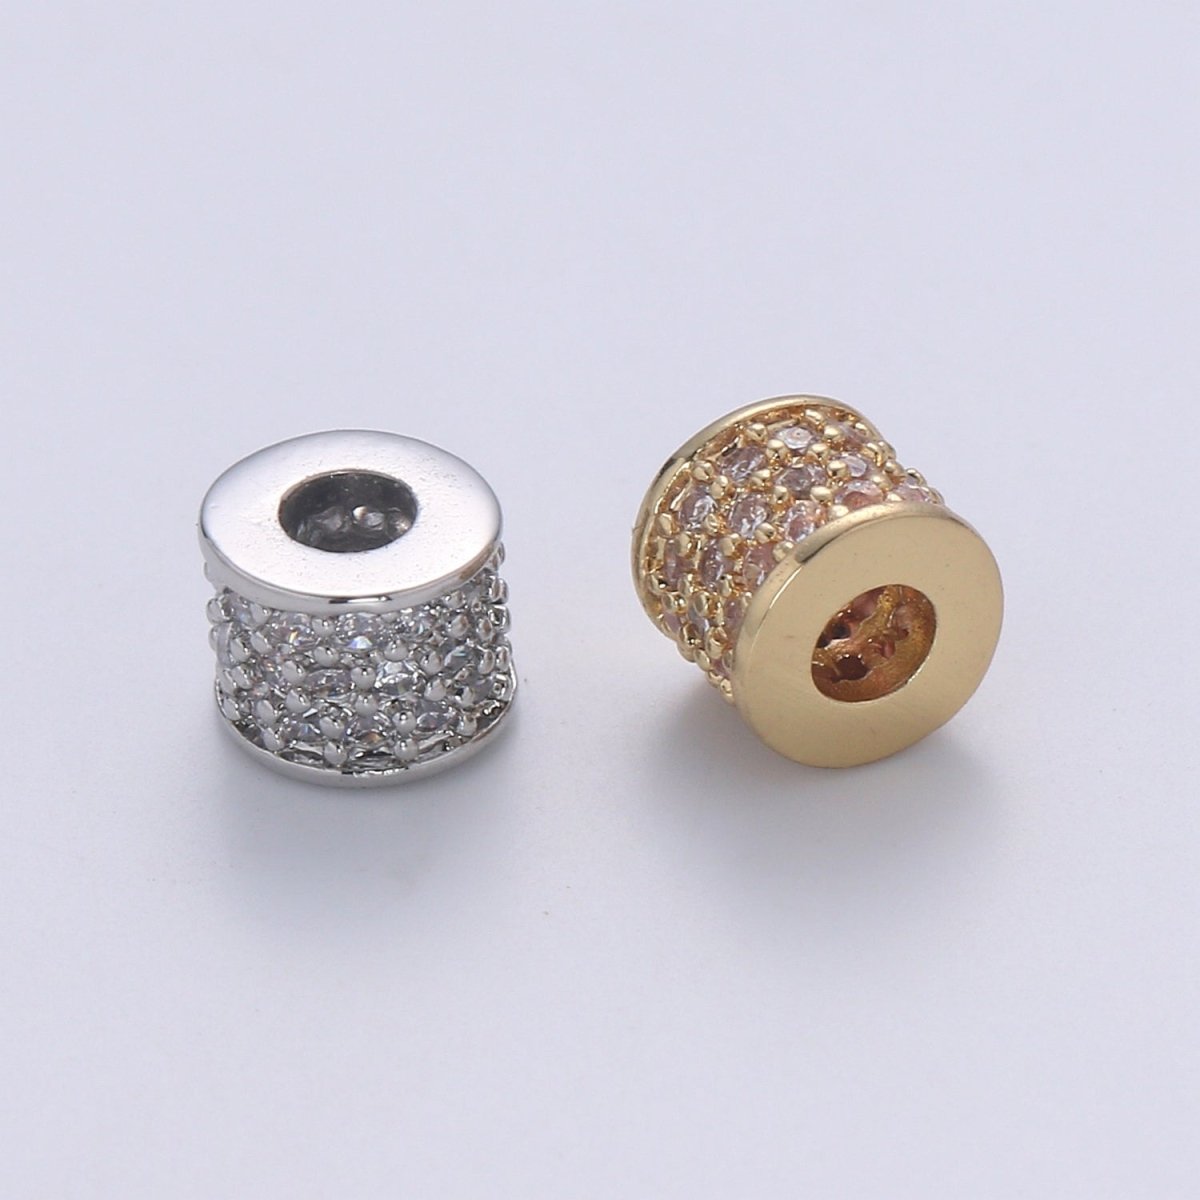 Gold Filled Micro Pave Barell Tube Spacer Beads, Big Hole Spacer Beads, Rondelle Spacer Bead CZ Rondelle Spacer Beads, B-678 B-679 - DLUXCA